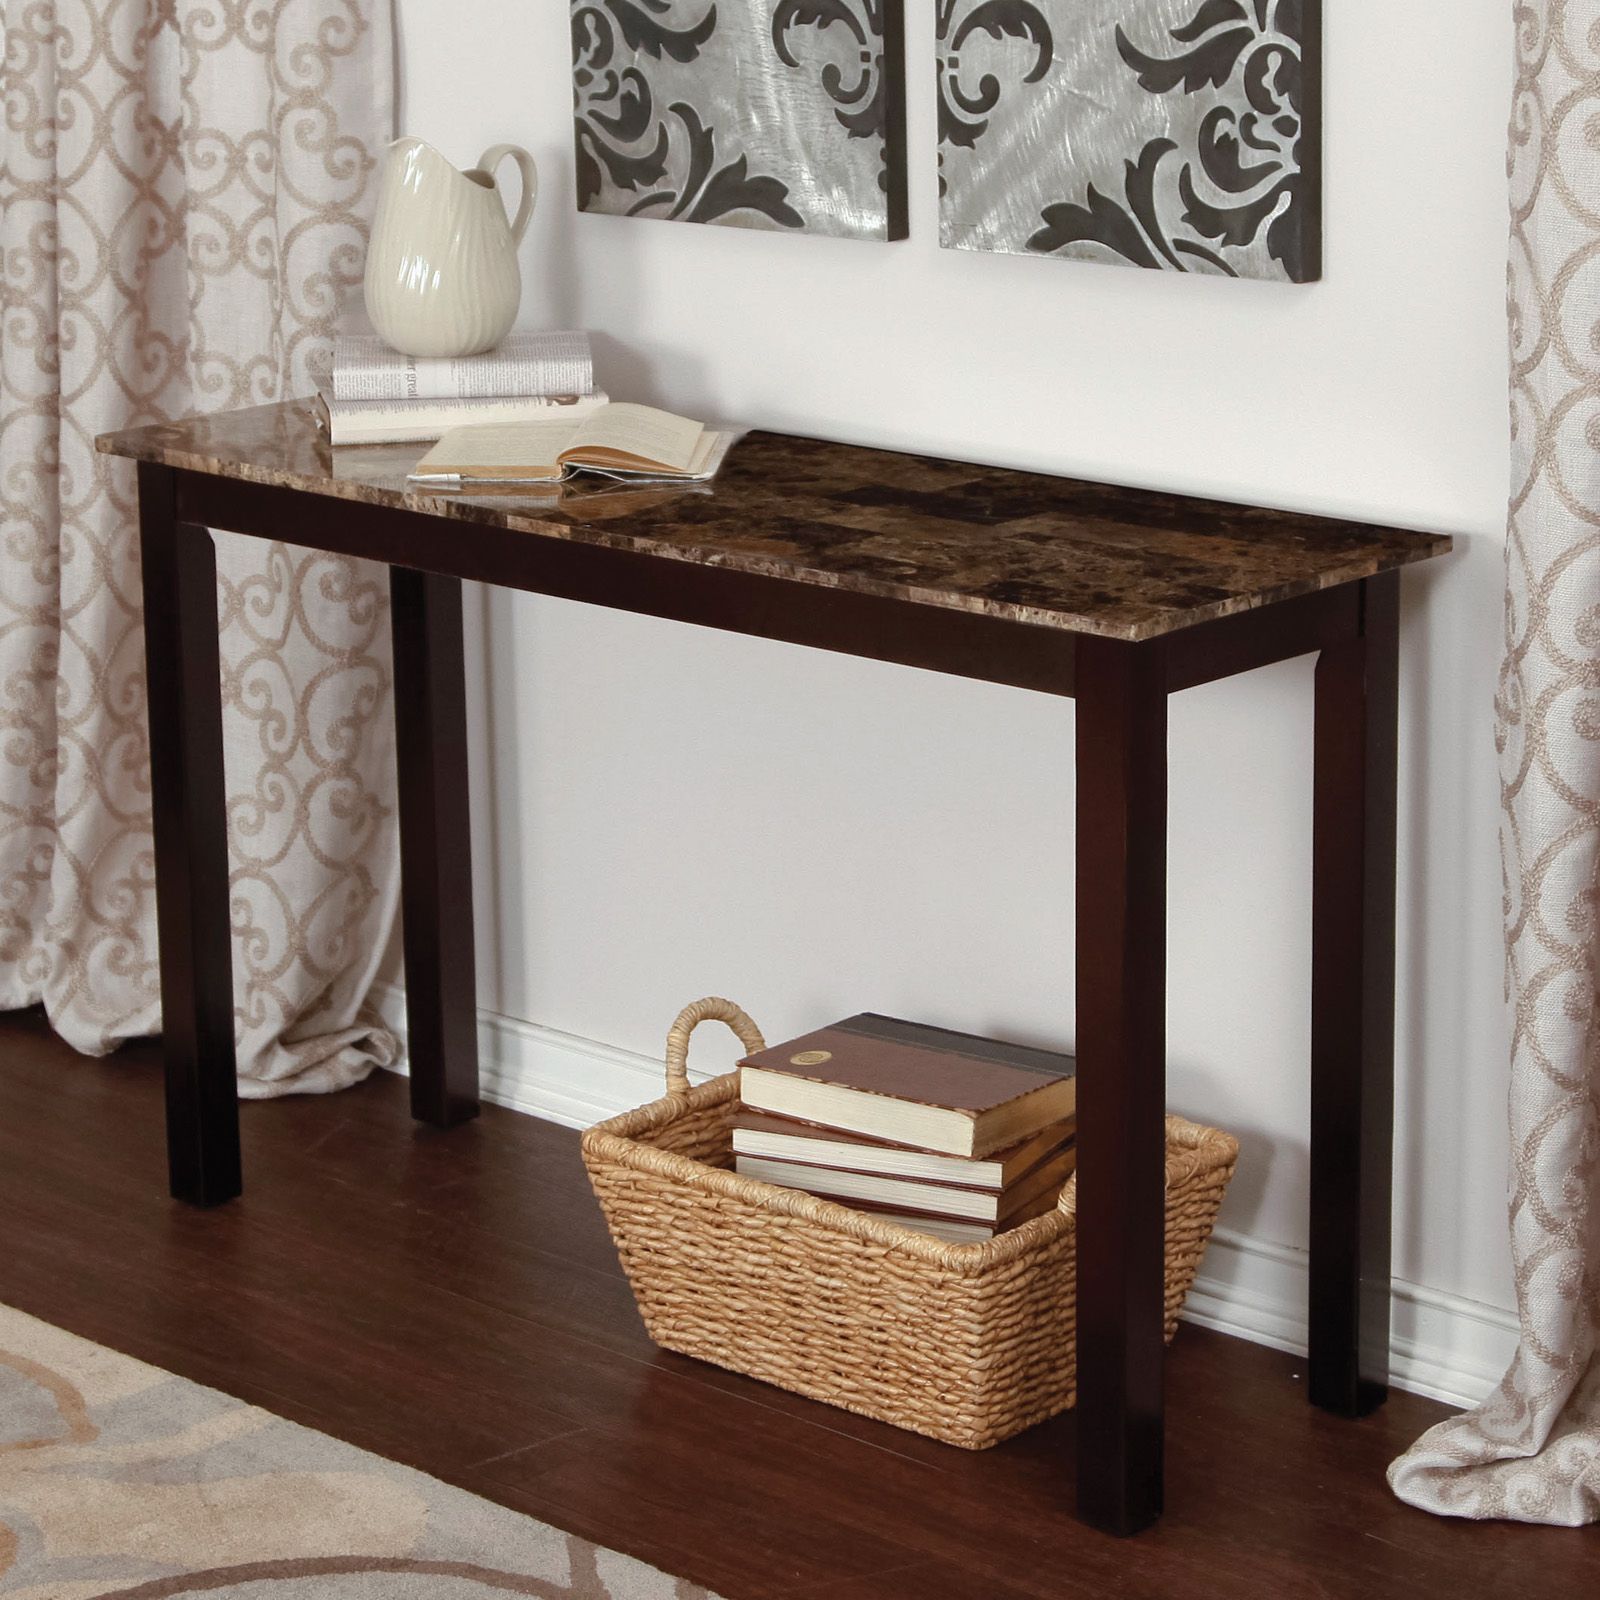 Palazzo Faux Marble Console Table – Console Tables At Hayneedle For Faux White Marble And Metal Console Tables (View 1 of 20)